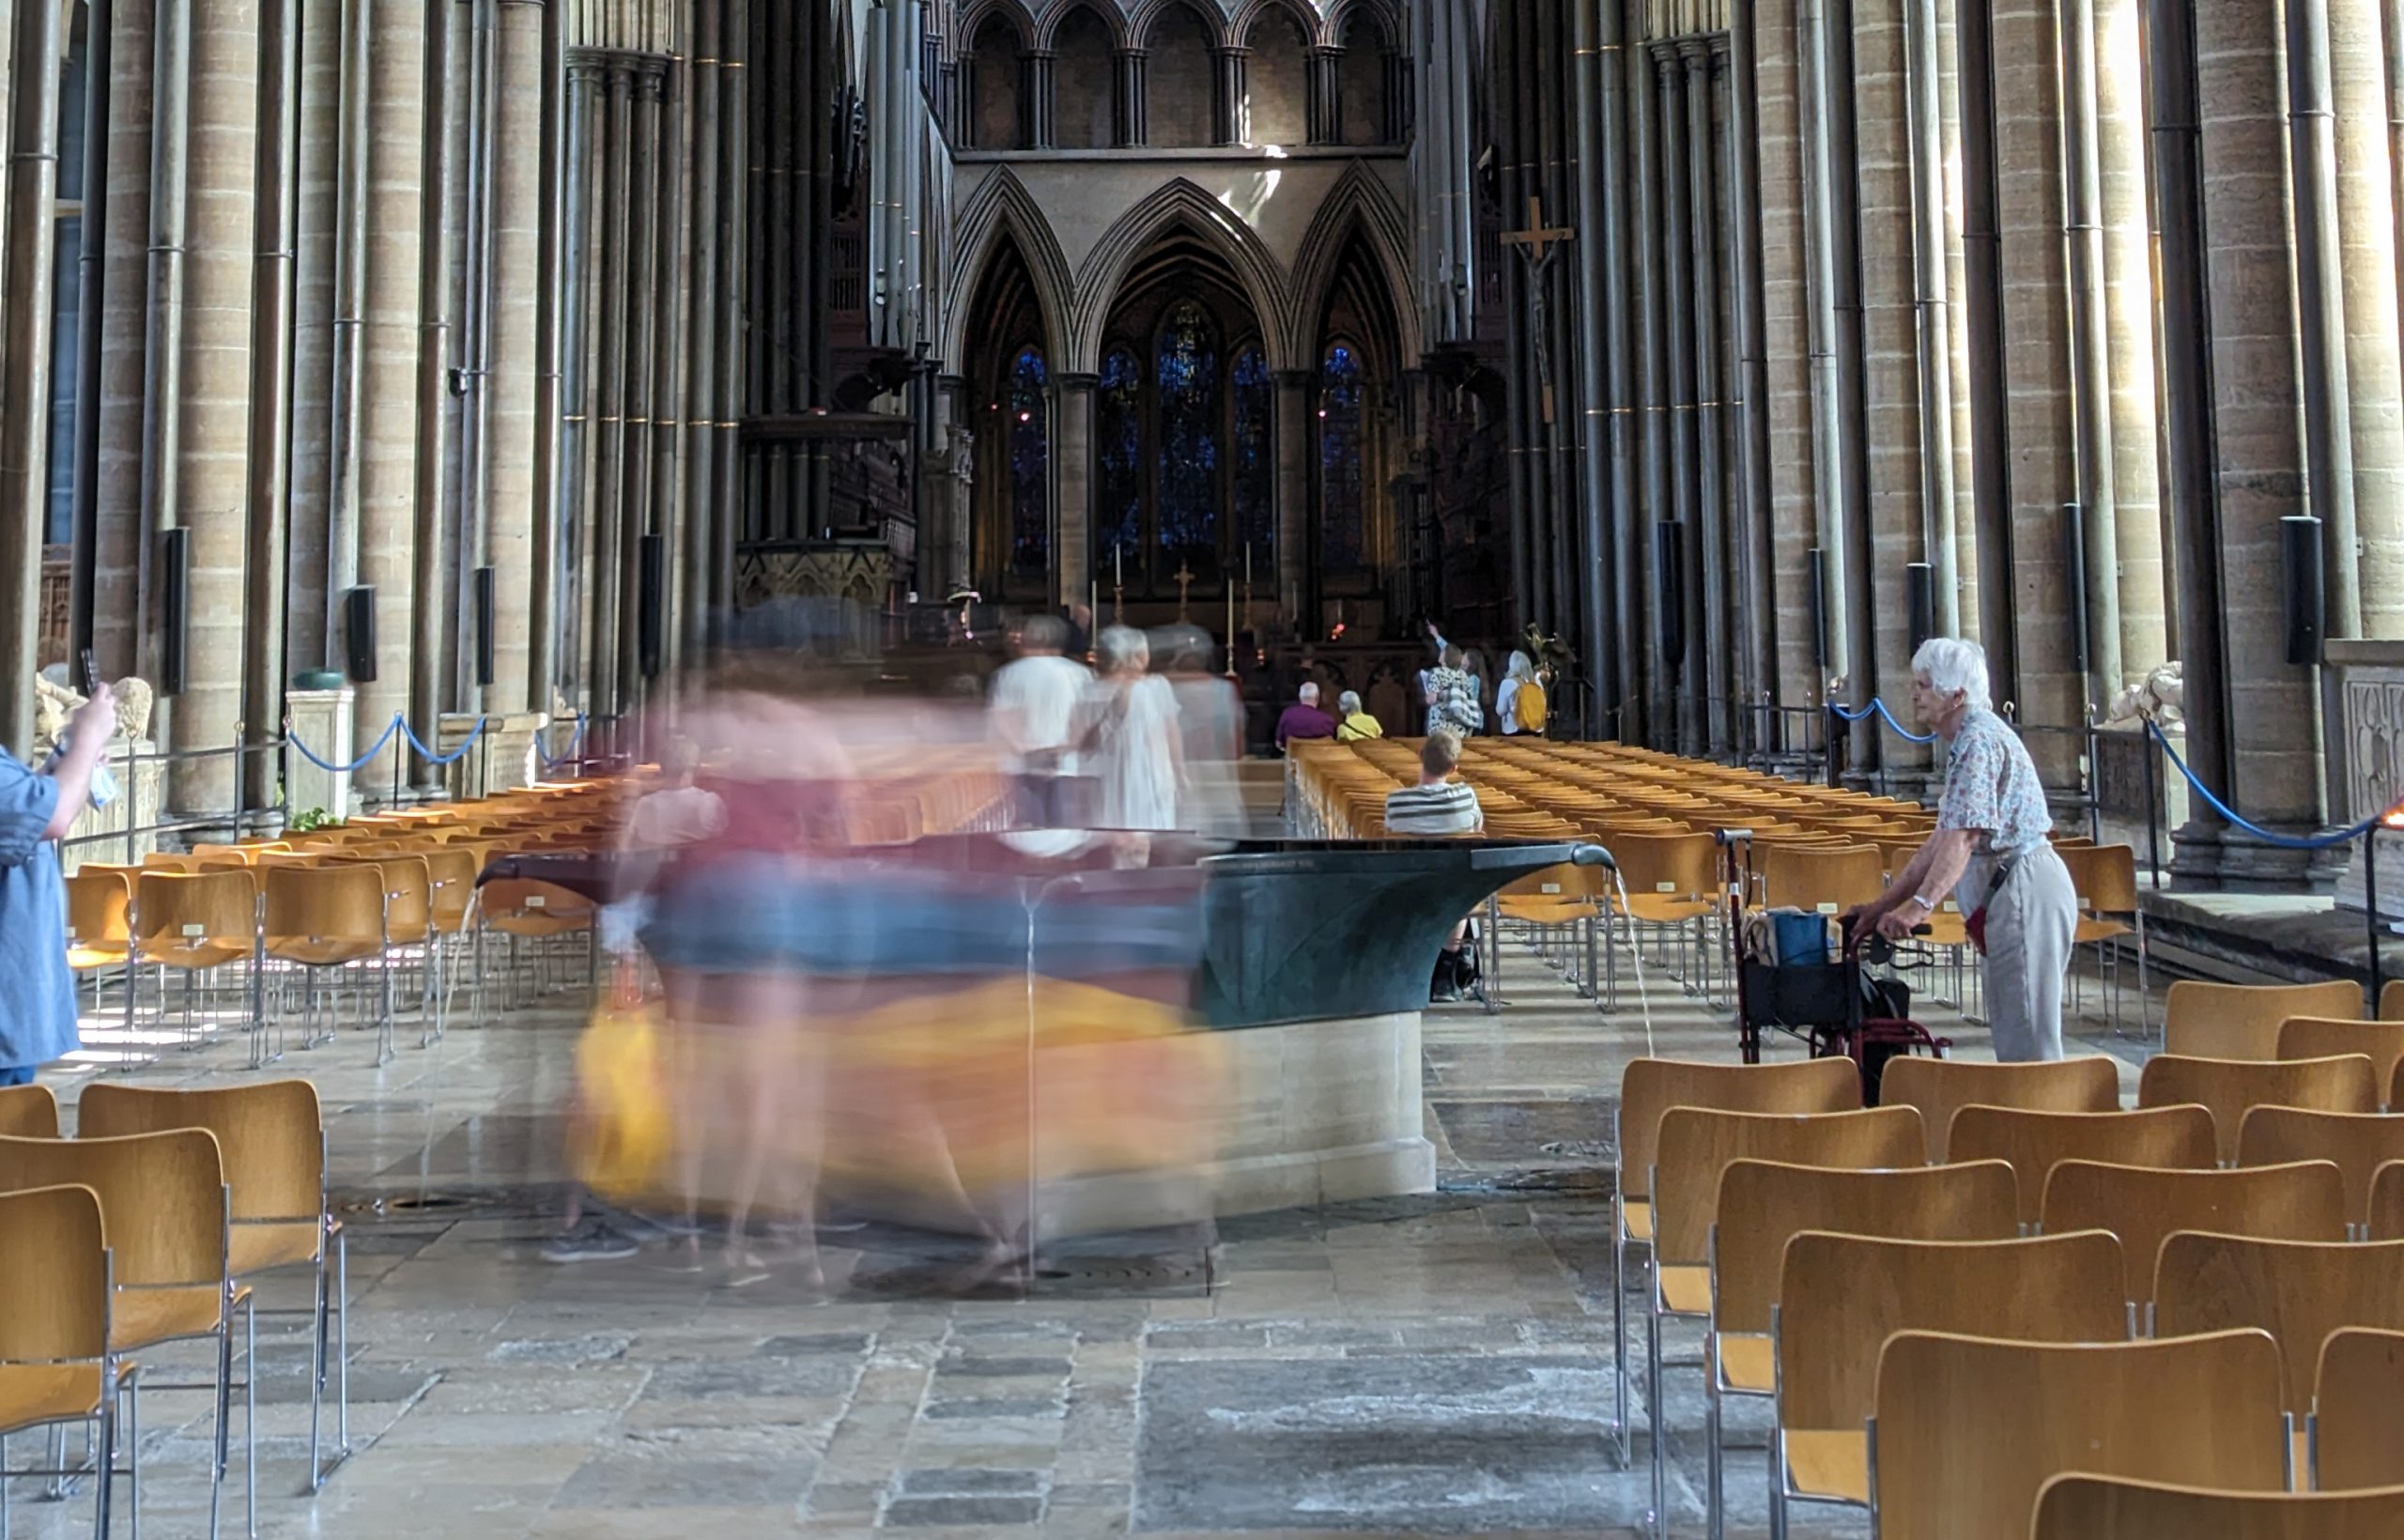 Motion blurred photo of visitors inside Salisbury Cathedral